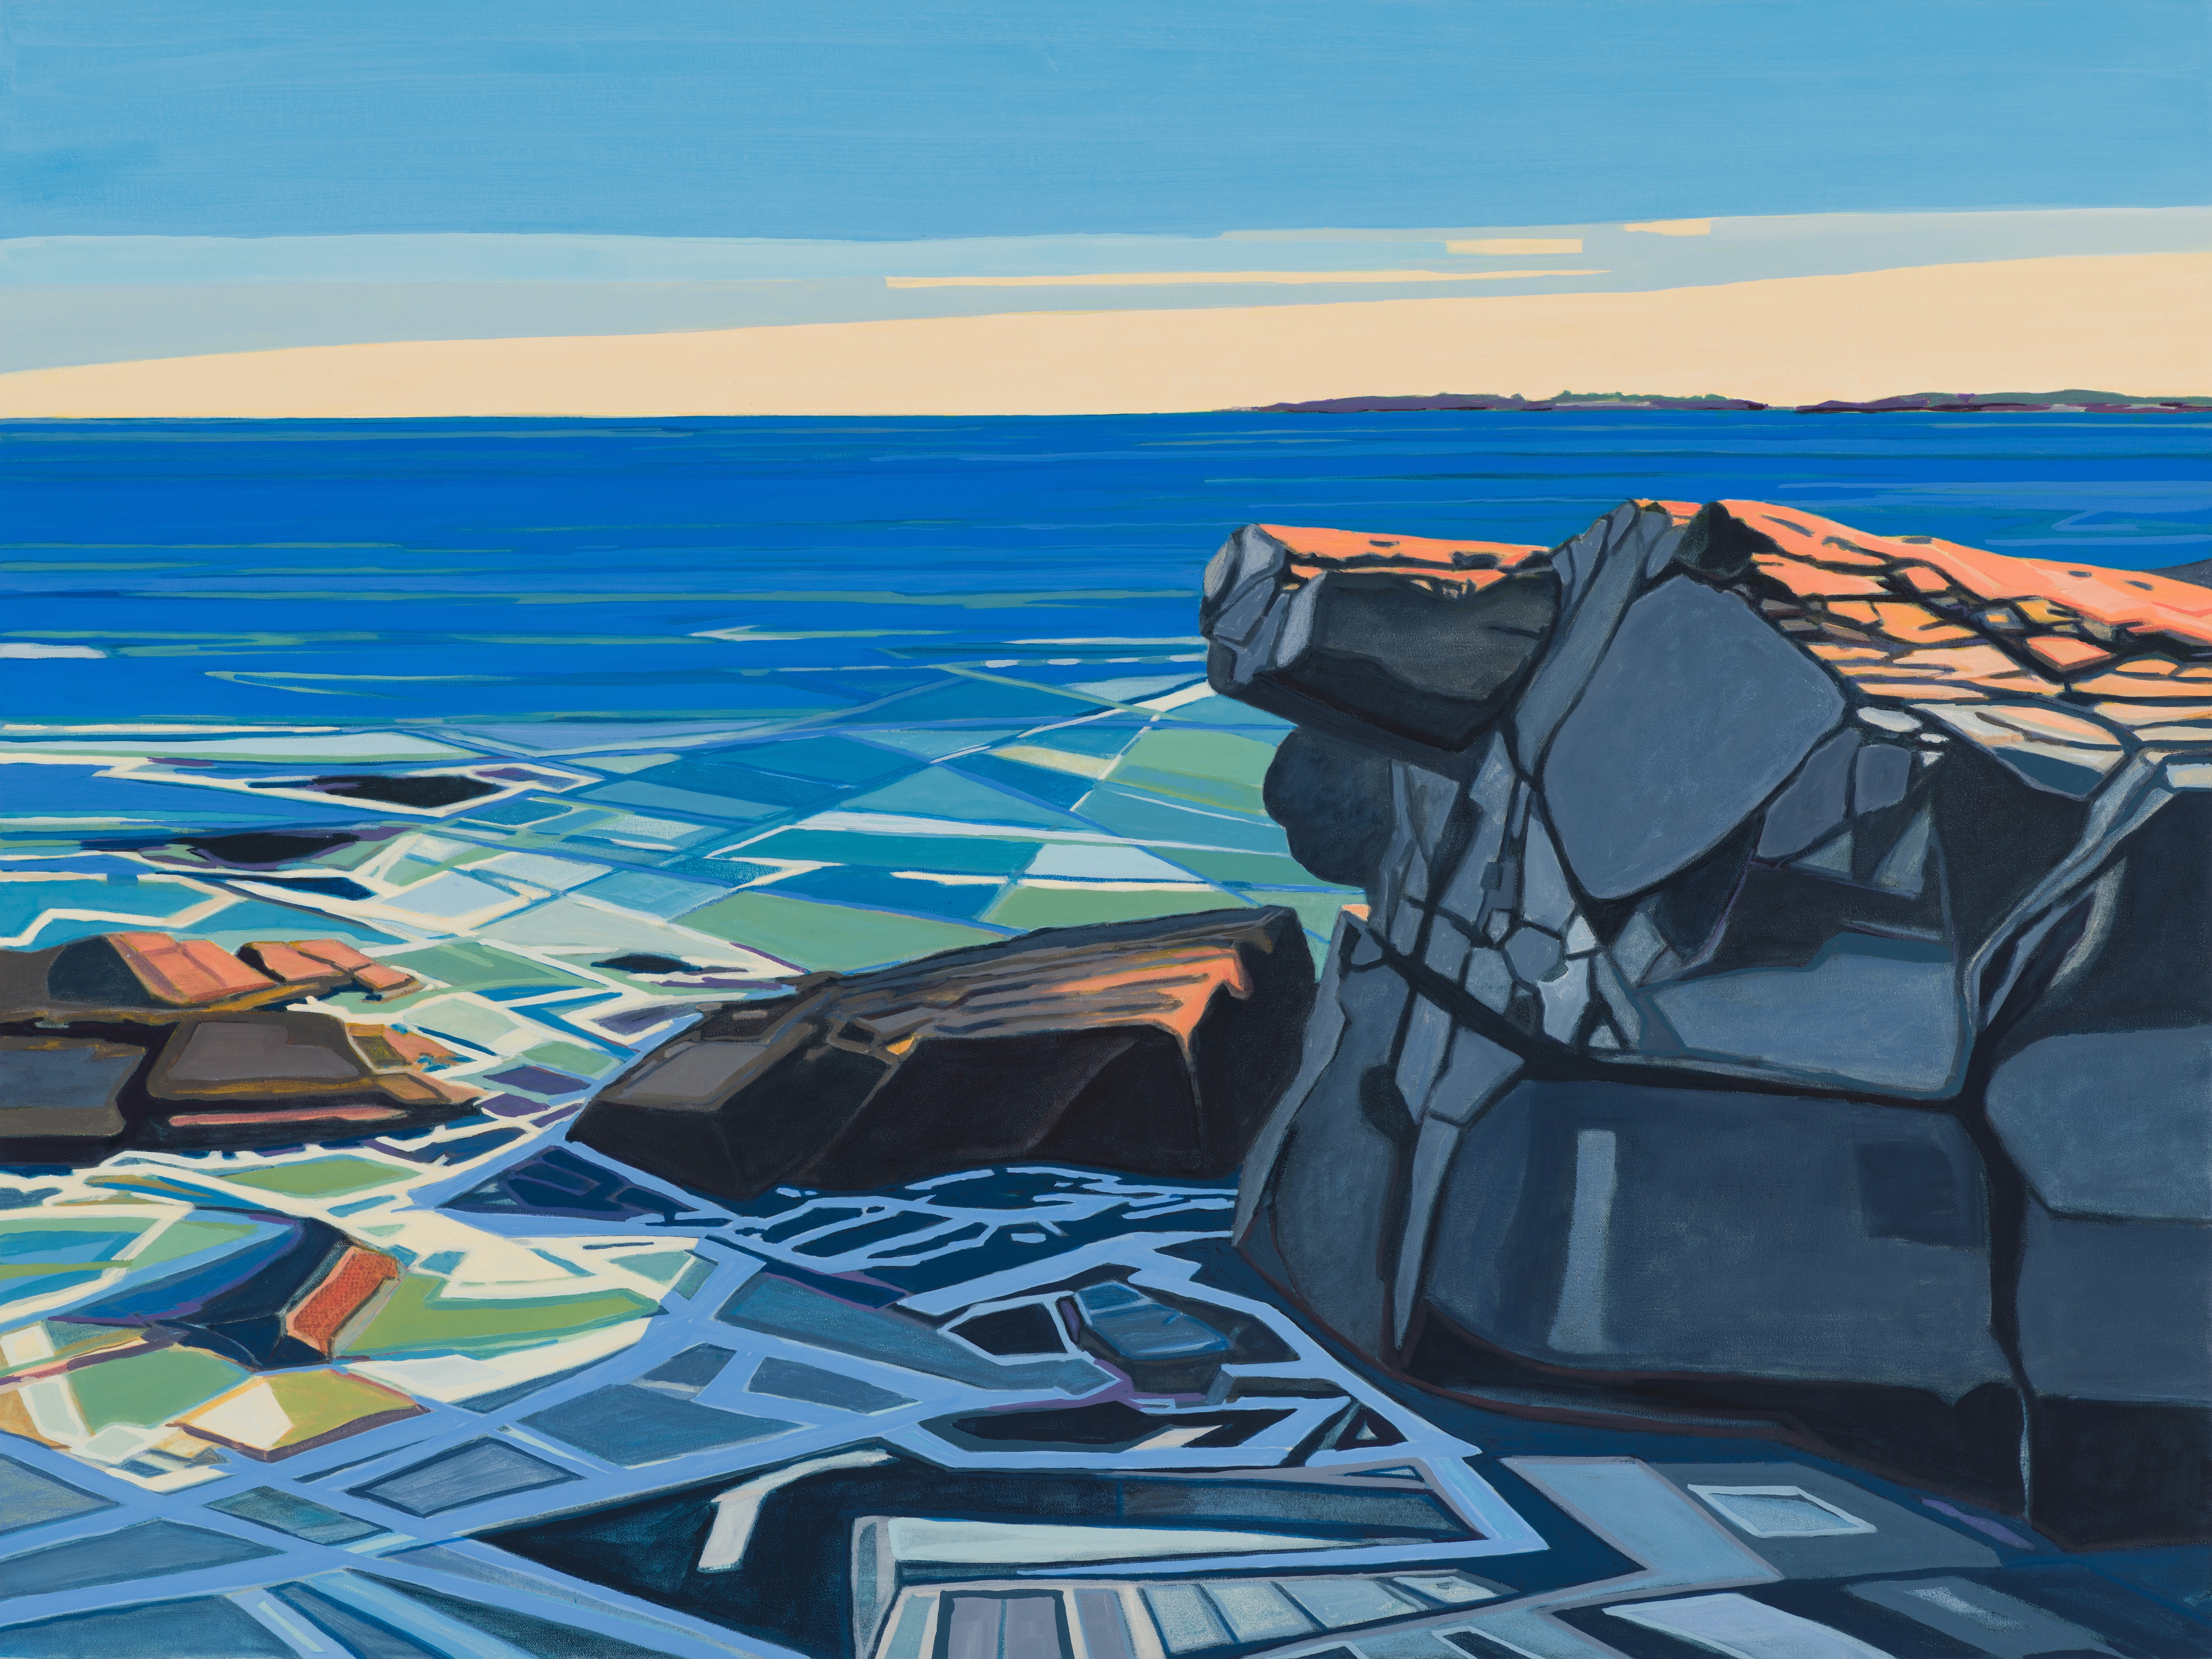 Cannon Rock, 10/11/20, 15:14, 43.527875, -70.318145, 2021, oil on canvas, 30 x 40 inches